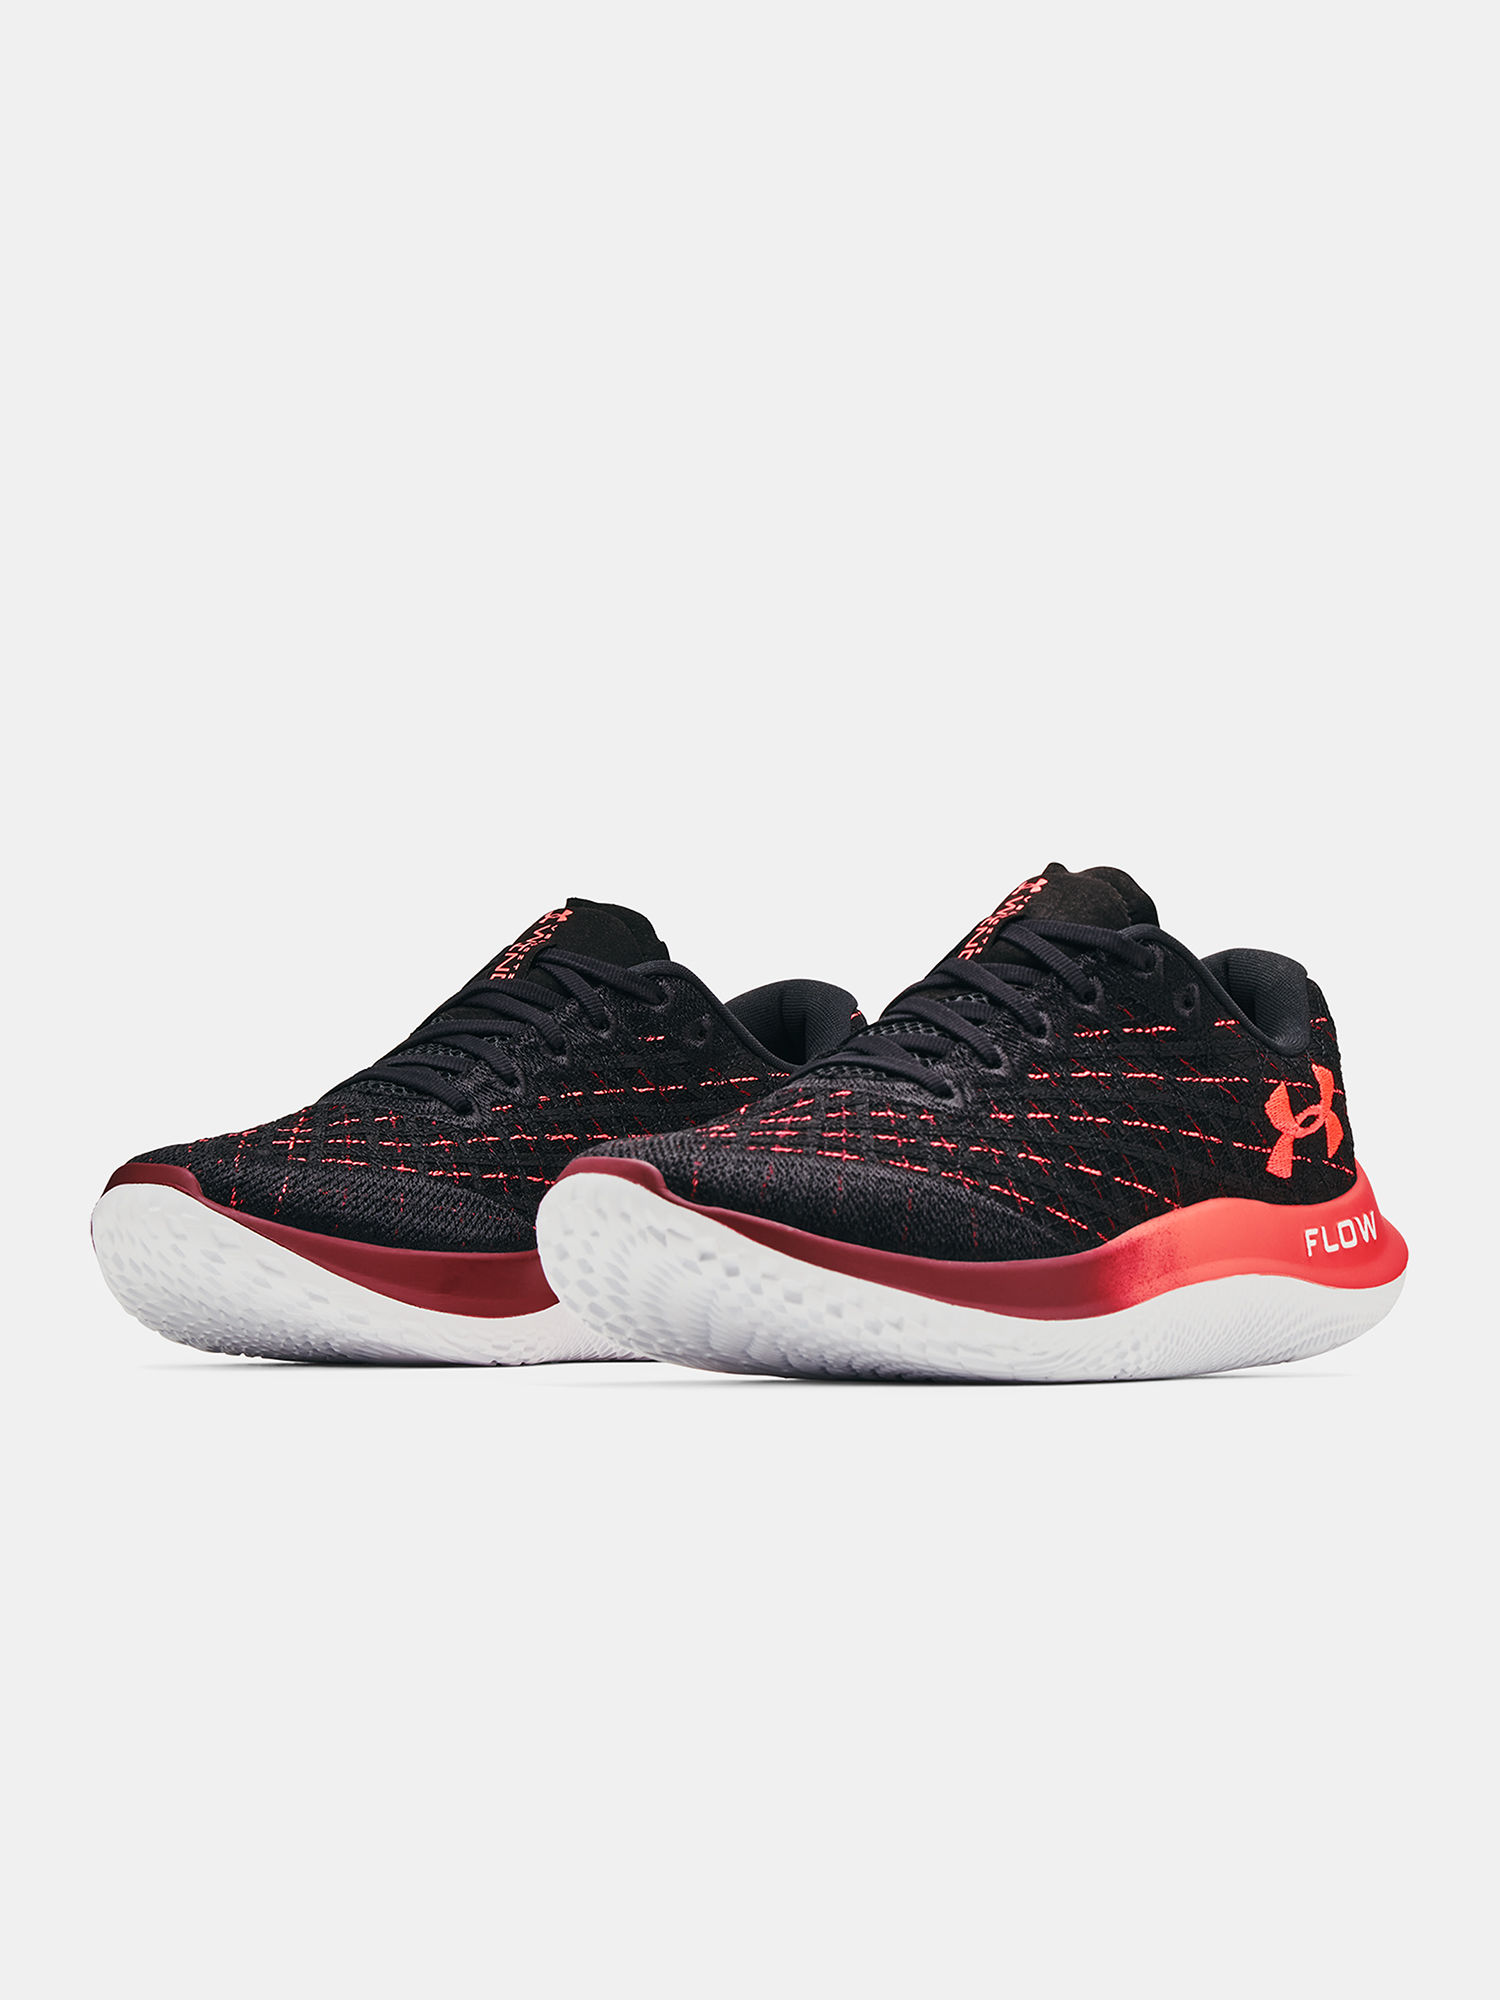 Boty Under Armour FLOW Velociti Wind CLRSFT-BLK (3)